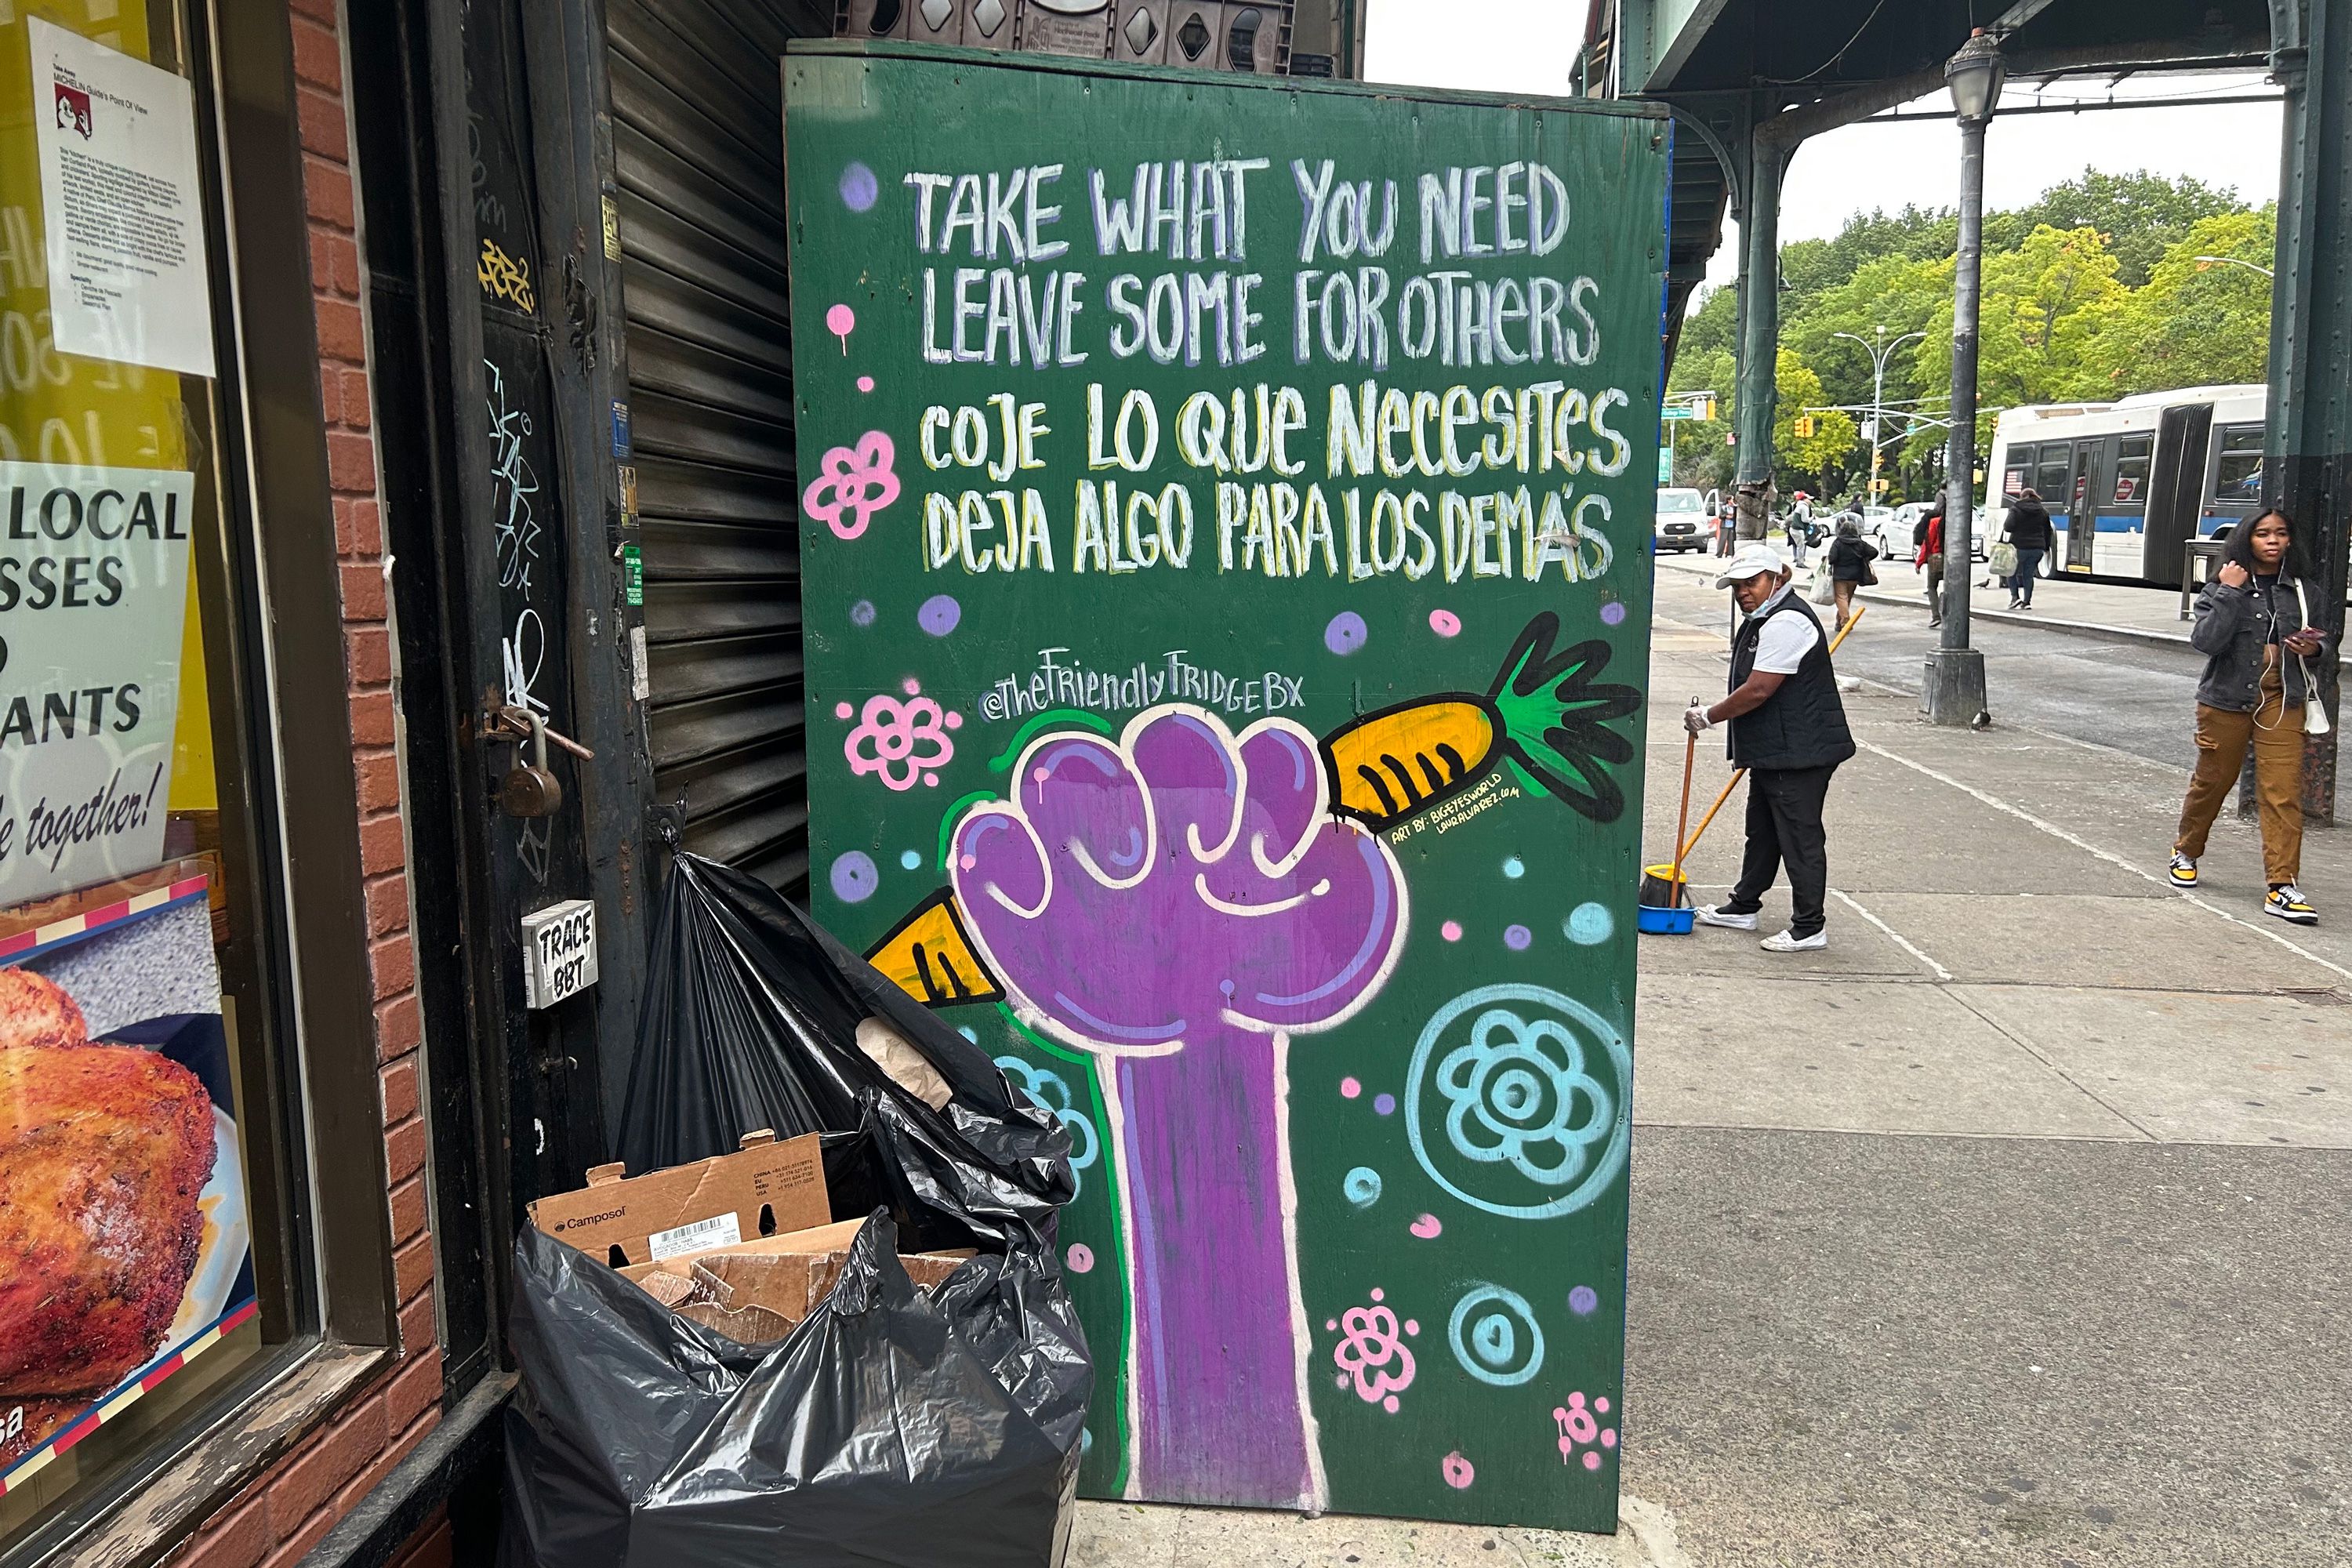 “Take What You Need, Leave Some For Others” was painted on the side of a community fridge in Riverdale.